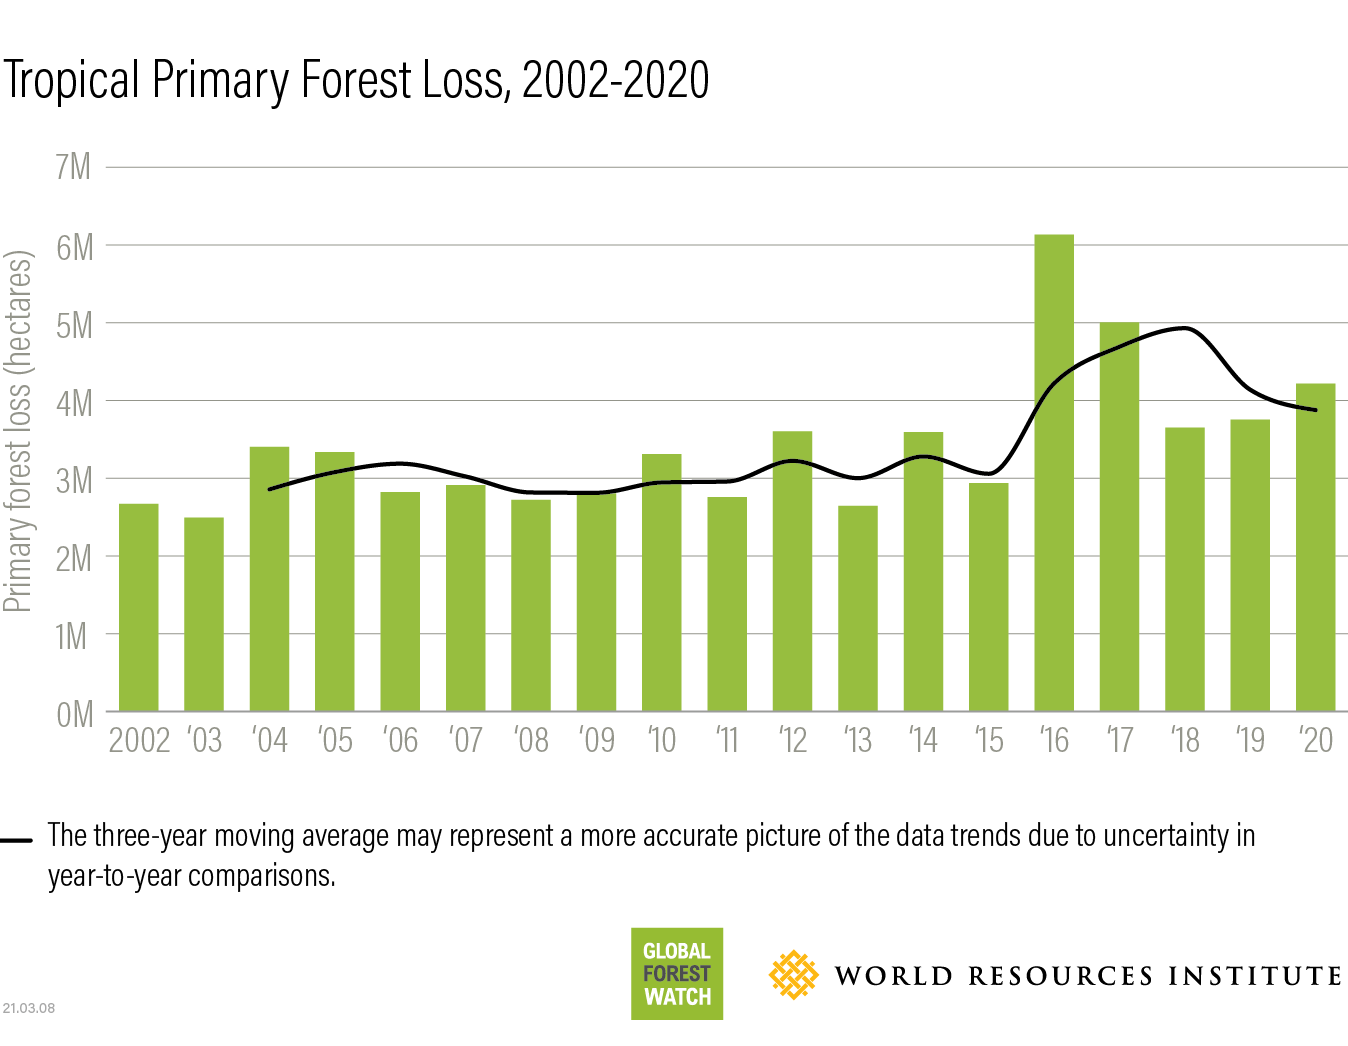 Tropical primary forest loss 2020 data